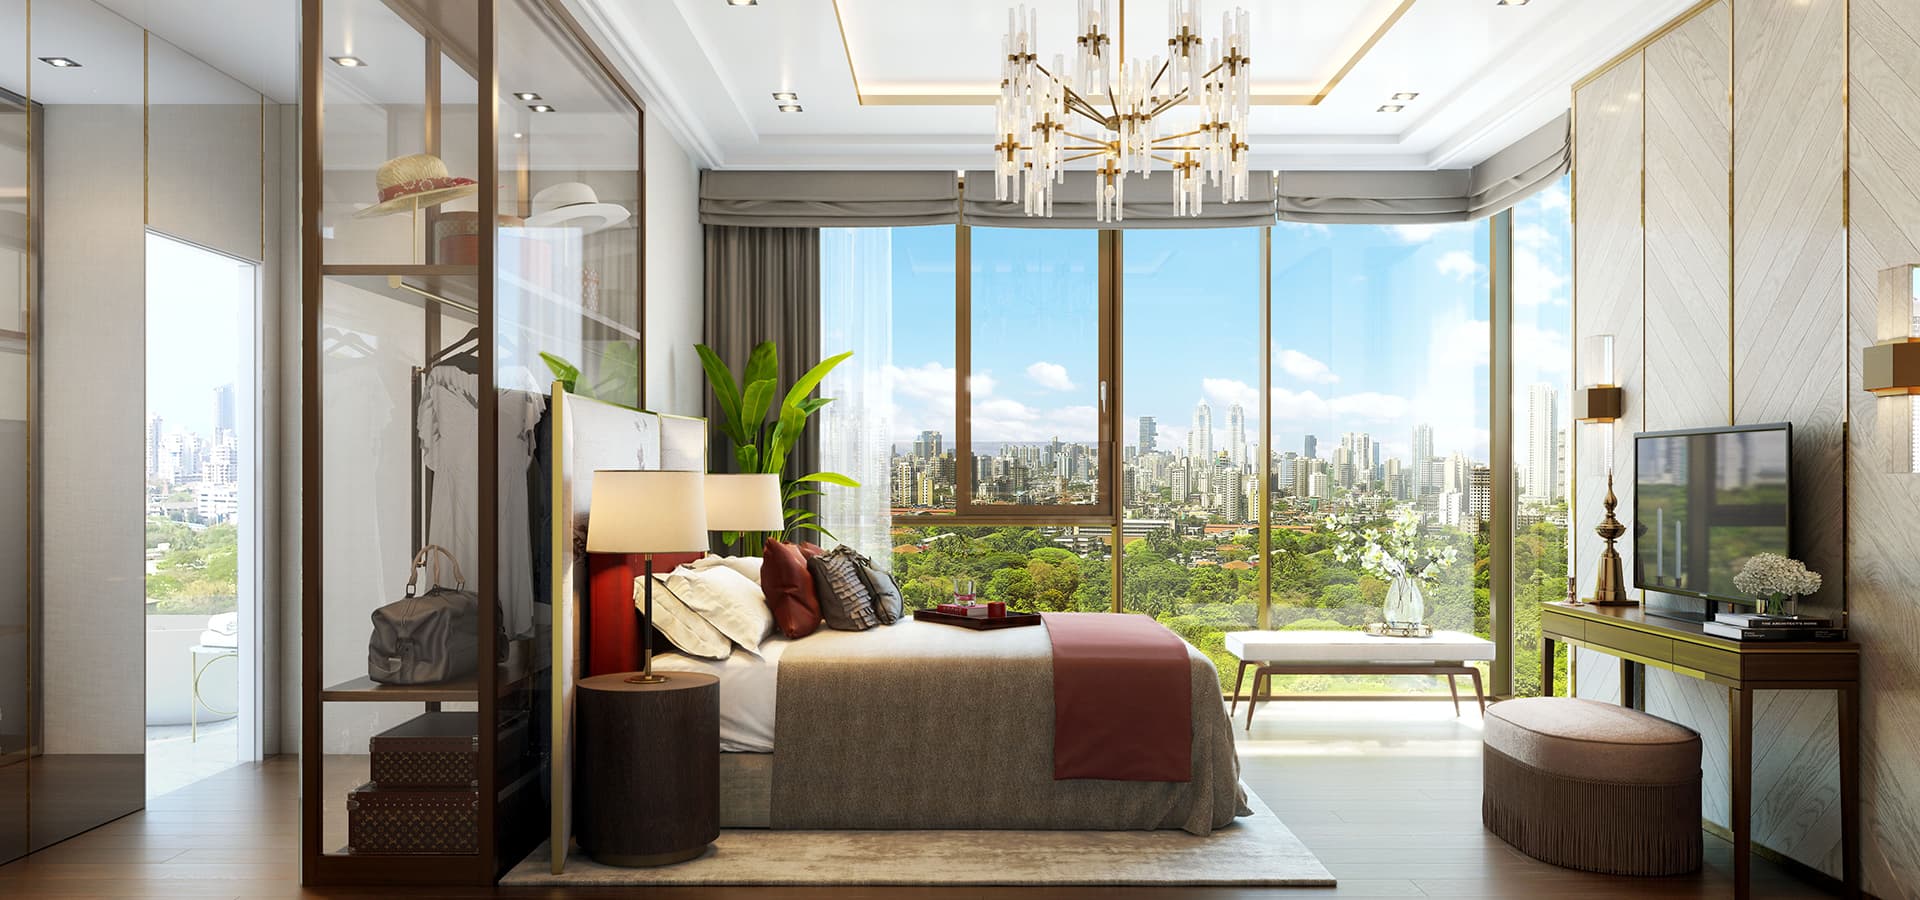 Piramal Realty's interior presents a master bedroom, exemplifying the elegance of luxurious apartments in Mumbai.